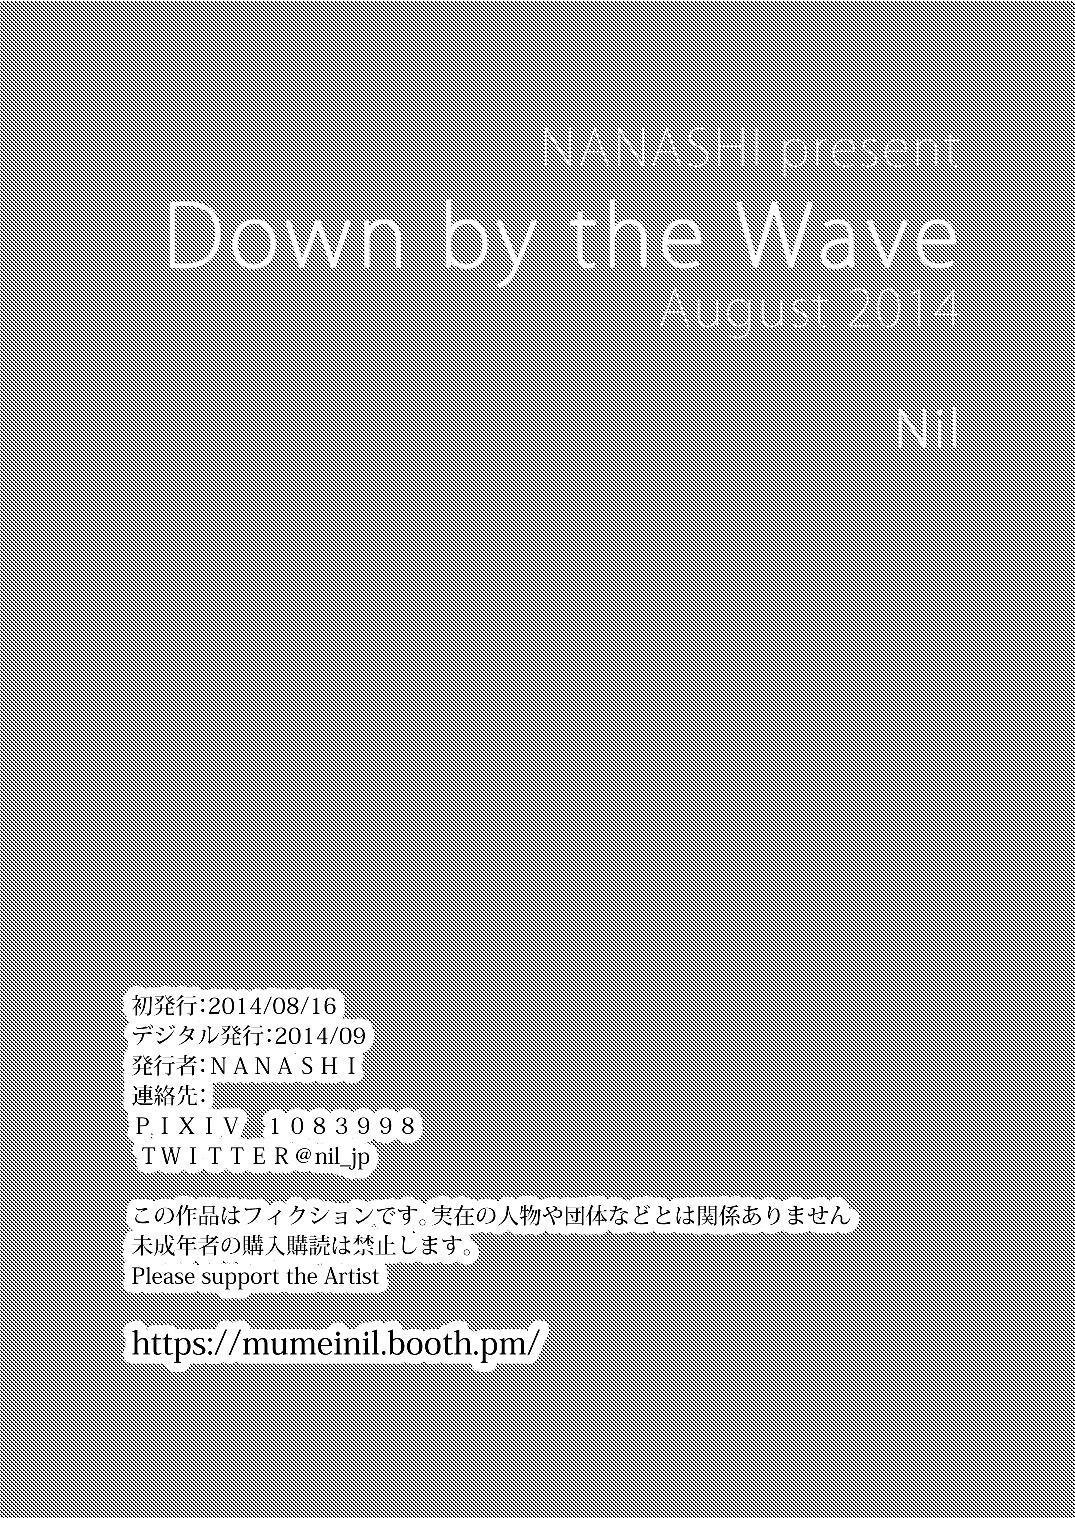 Down by the Wave 31